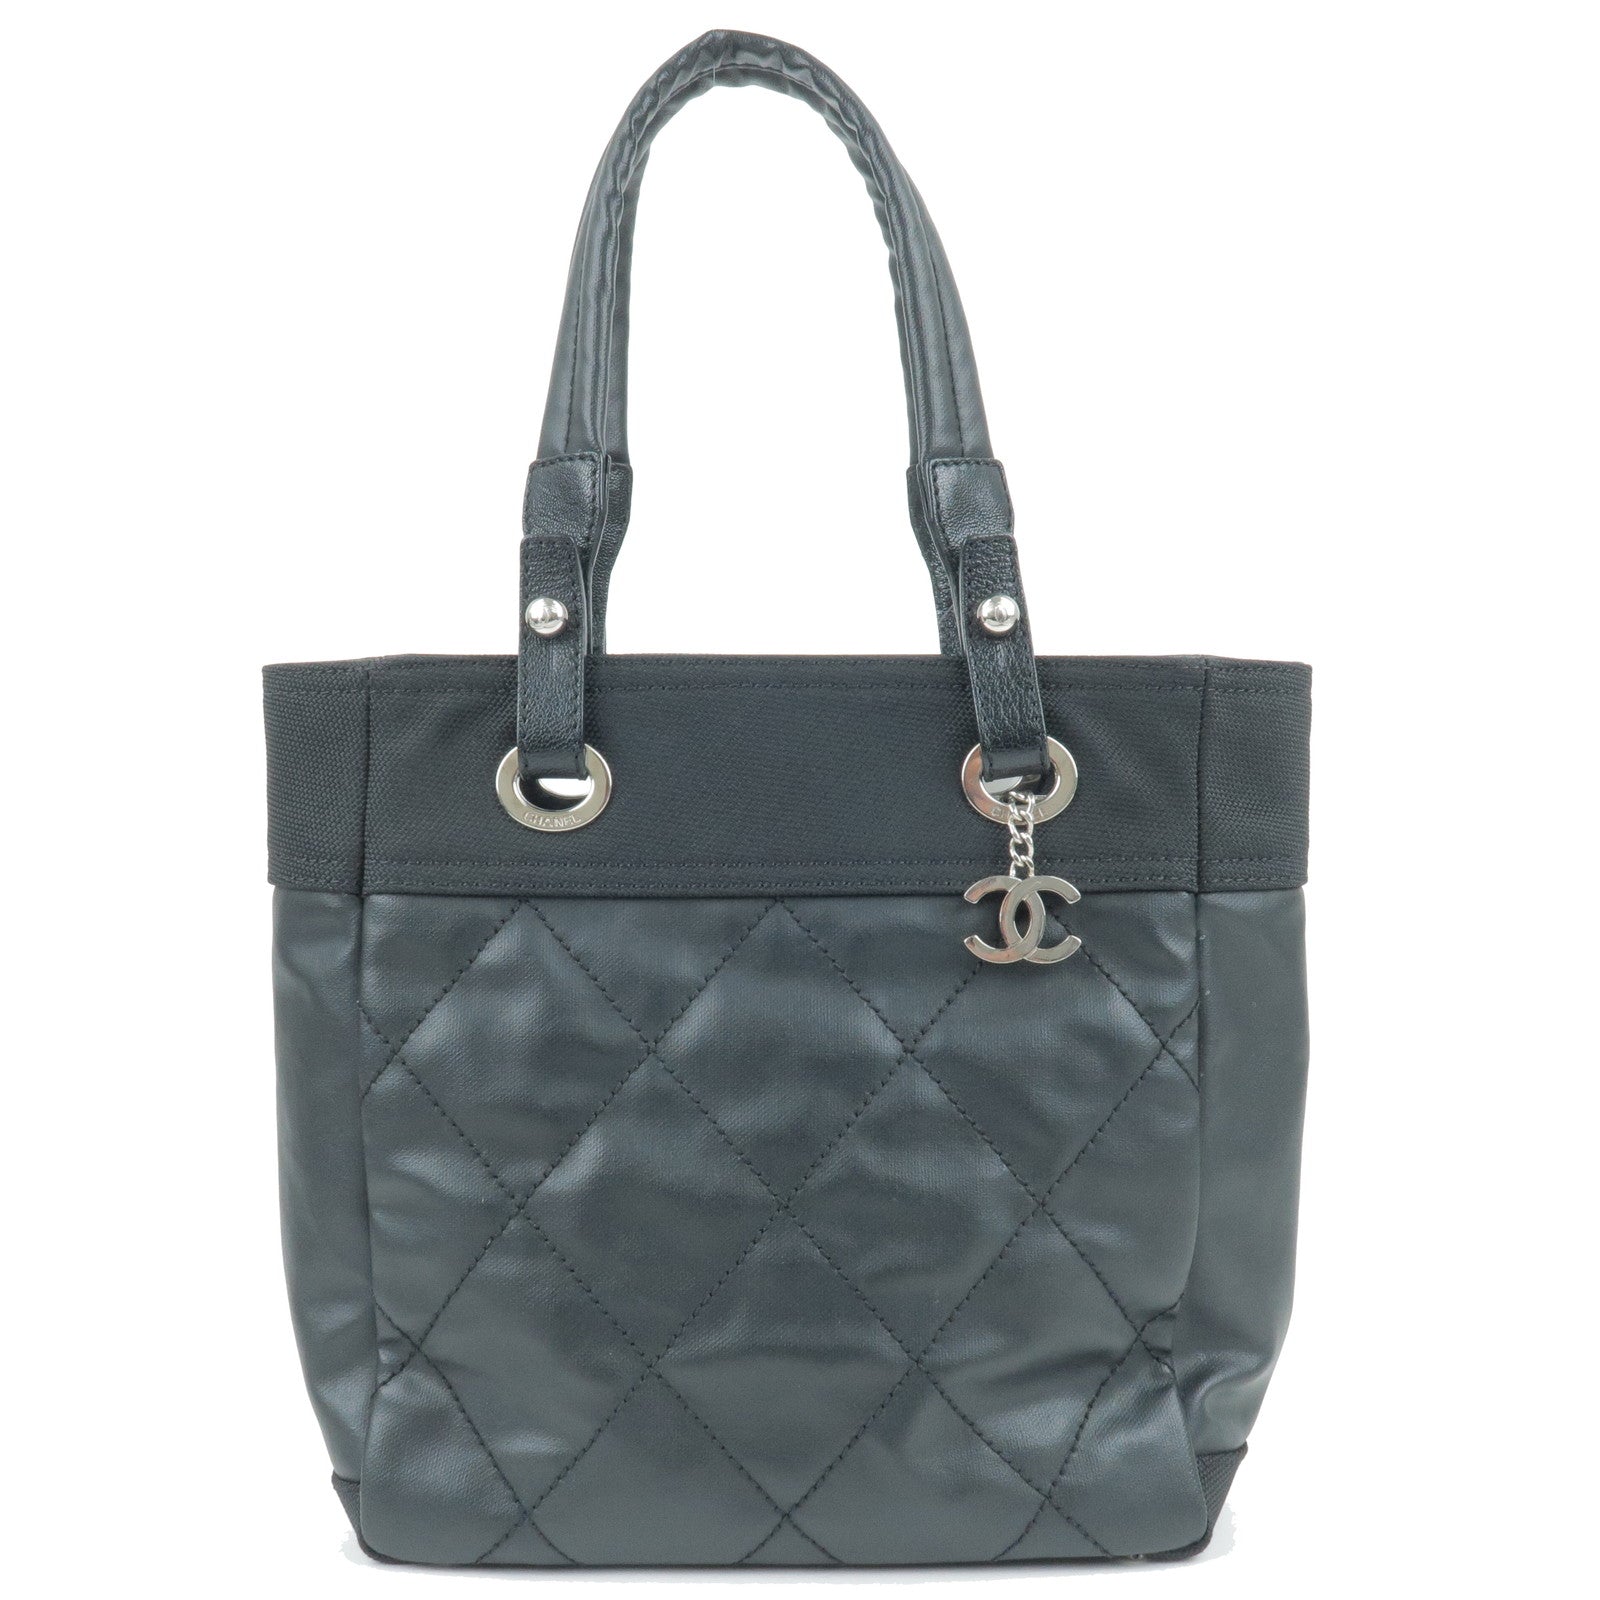 CHANEL-Coated-Canvas-Leather-Paris-Biarritz-PM-Tote-Bag-A34208